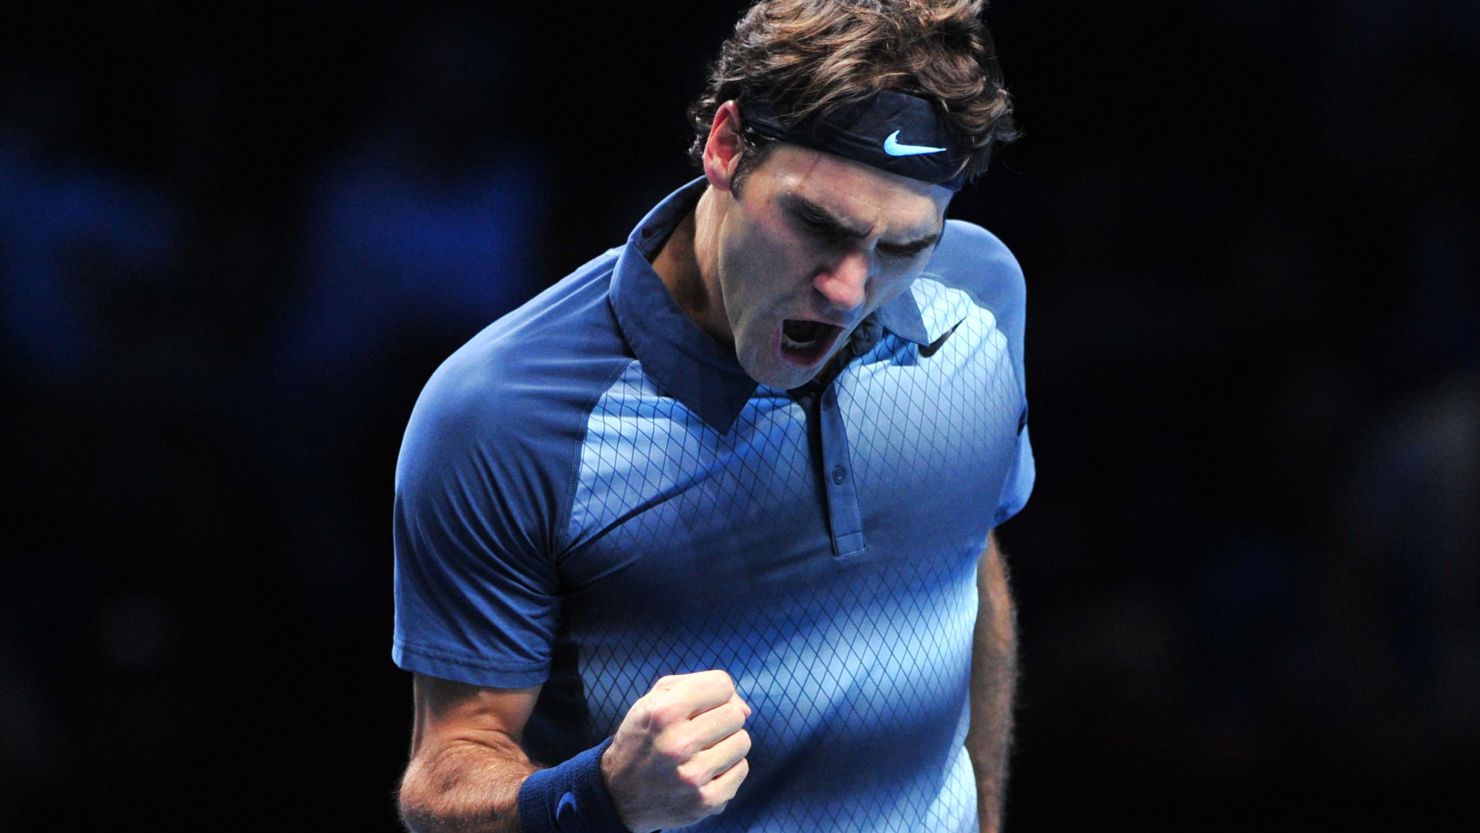 Roger Federer rallied to beat Juan Martin del Potro at London's O2 Arena on Saturday.